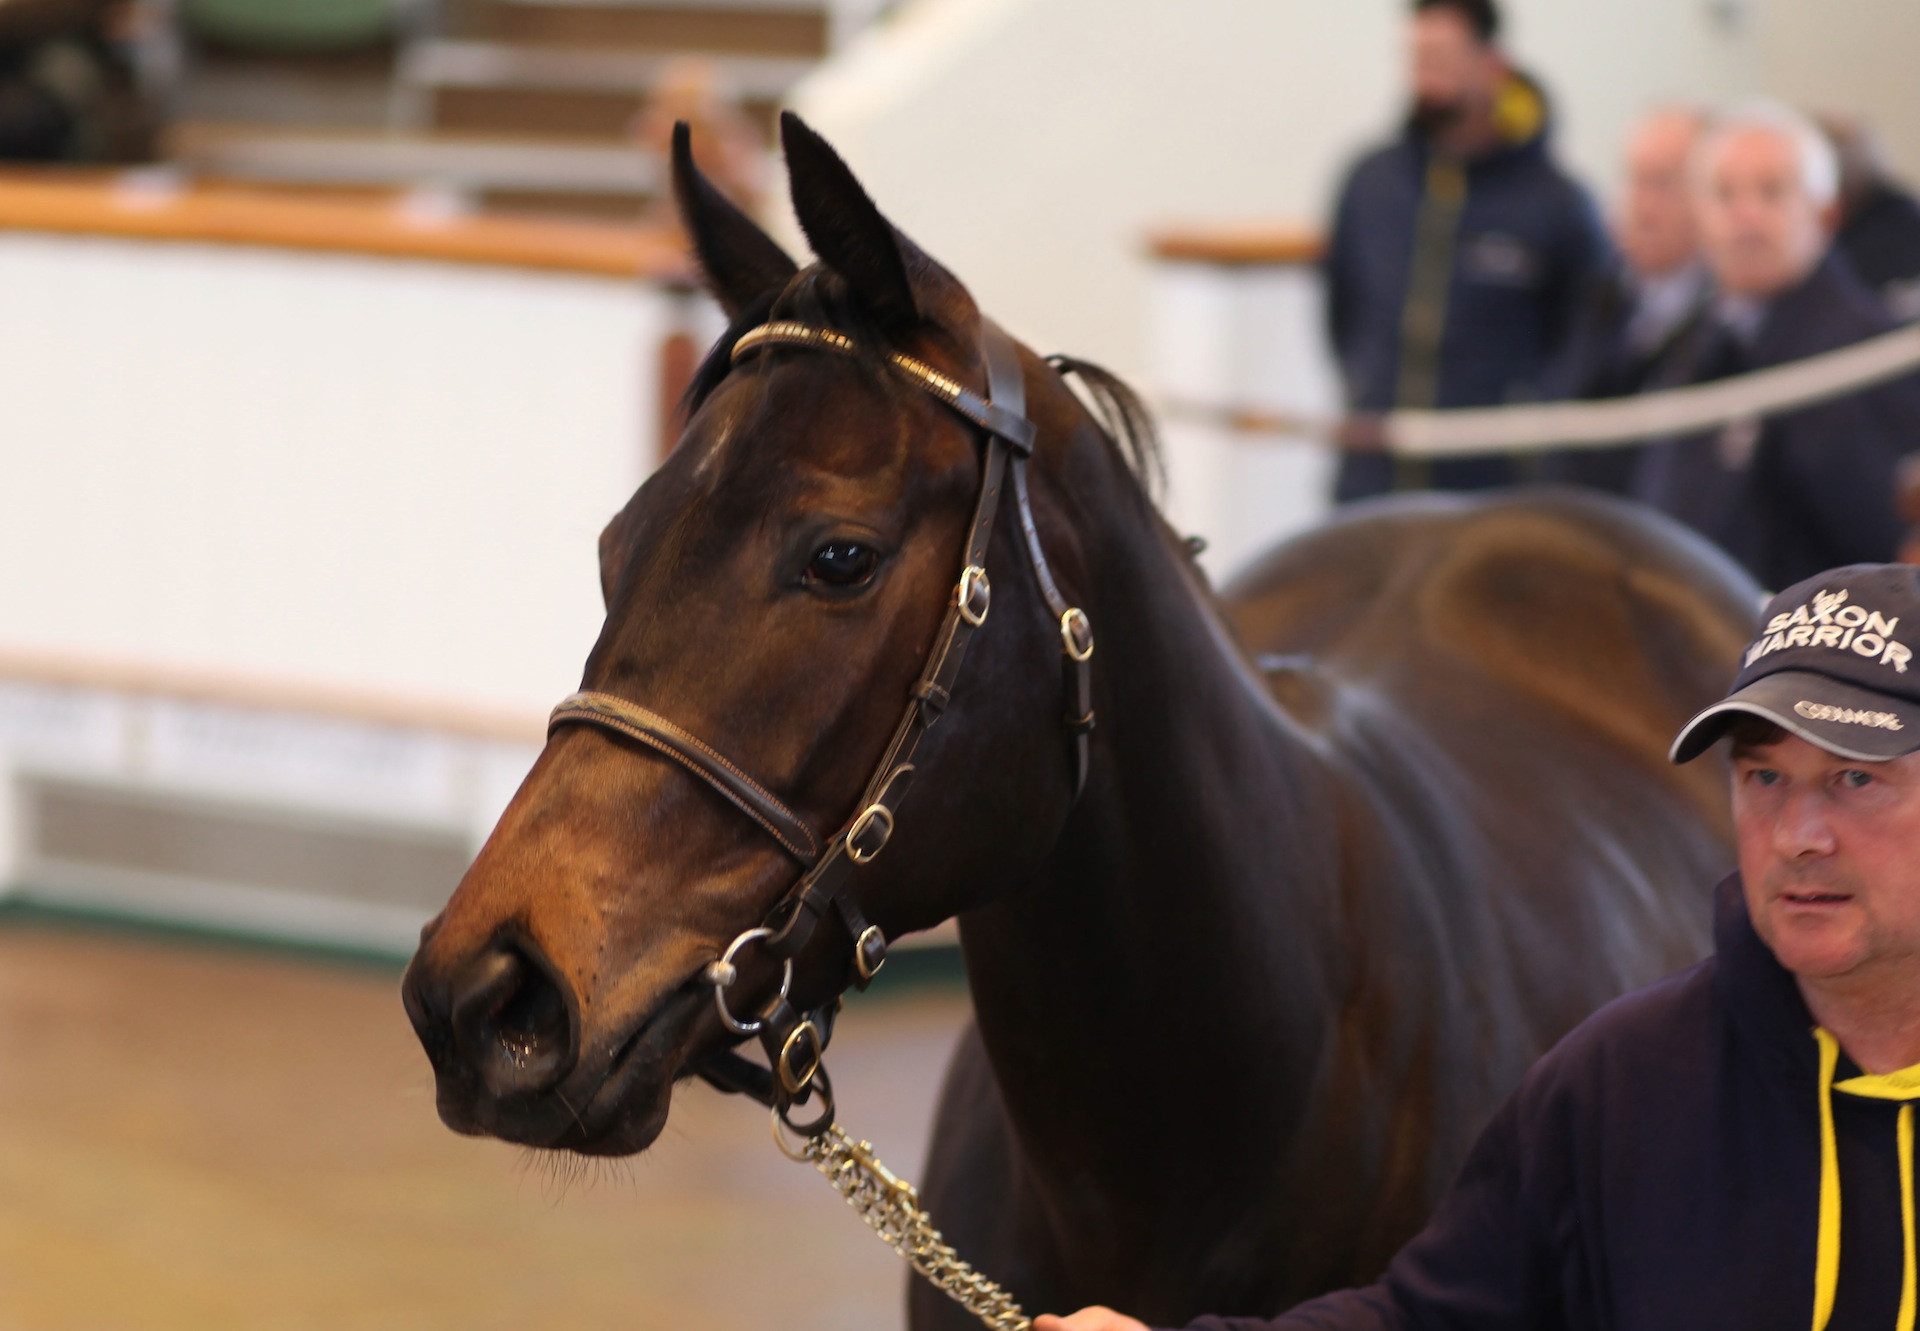 Lot 79 By No Nay Never Sells For 230K At The Tattersalls Craven Sale